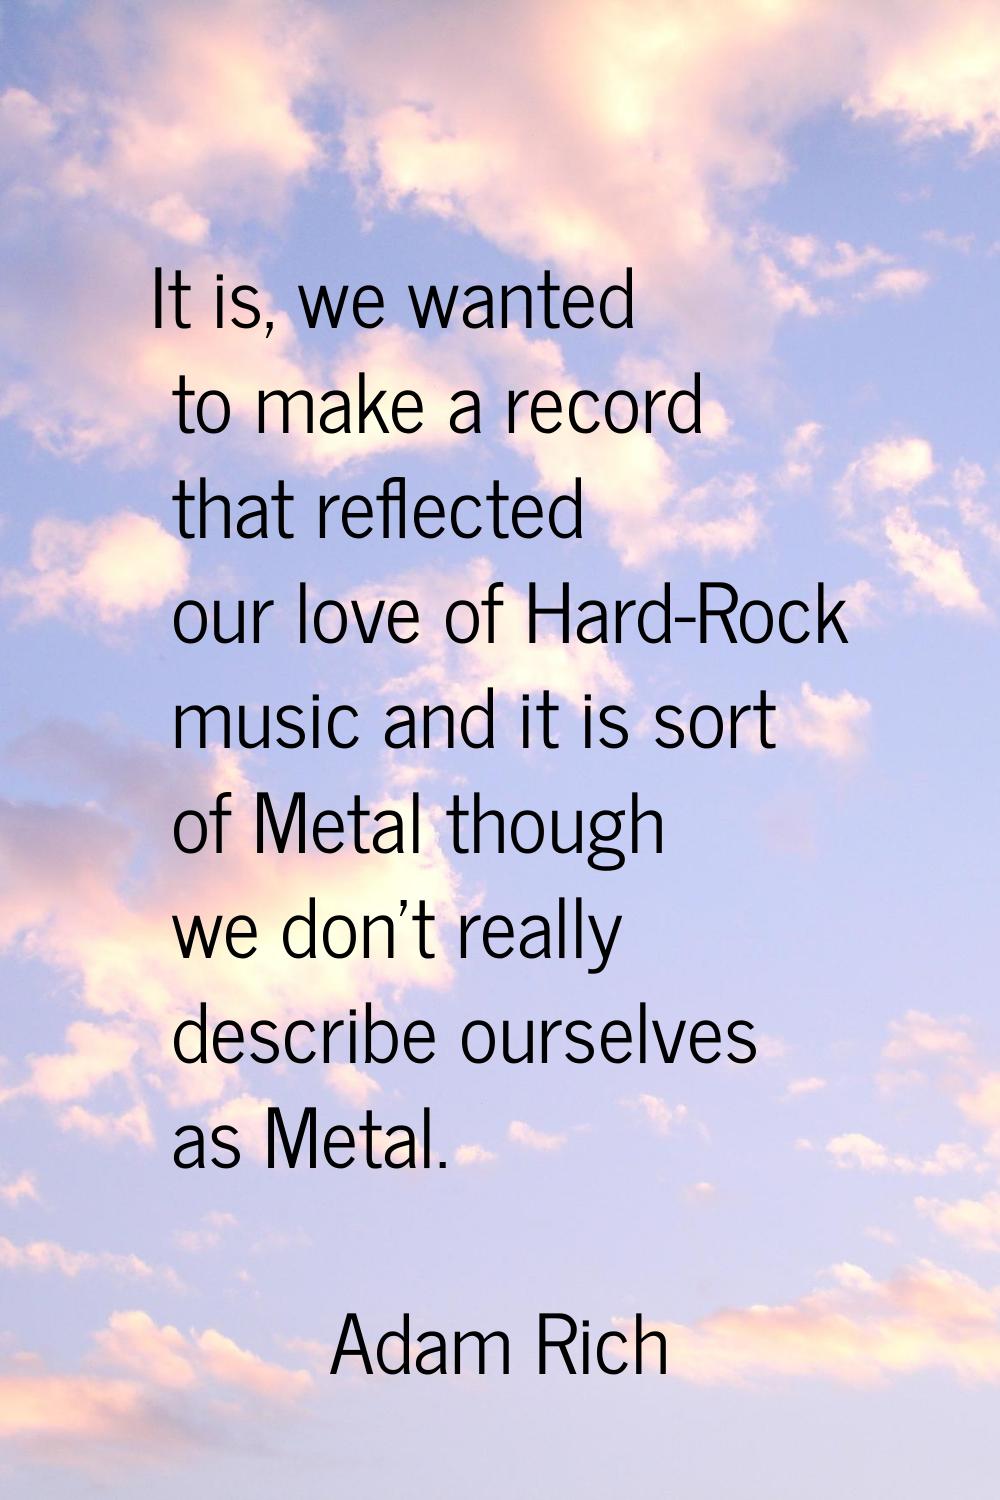 It is, we wanted to make a record that reflected our love of Hard-Rock music and it is sort of Meta